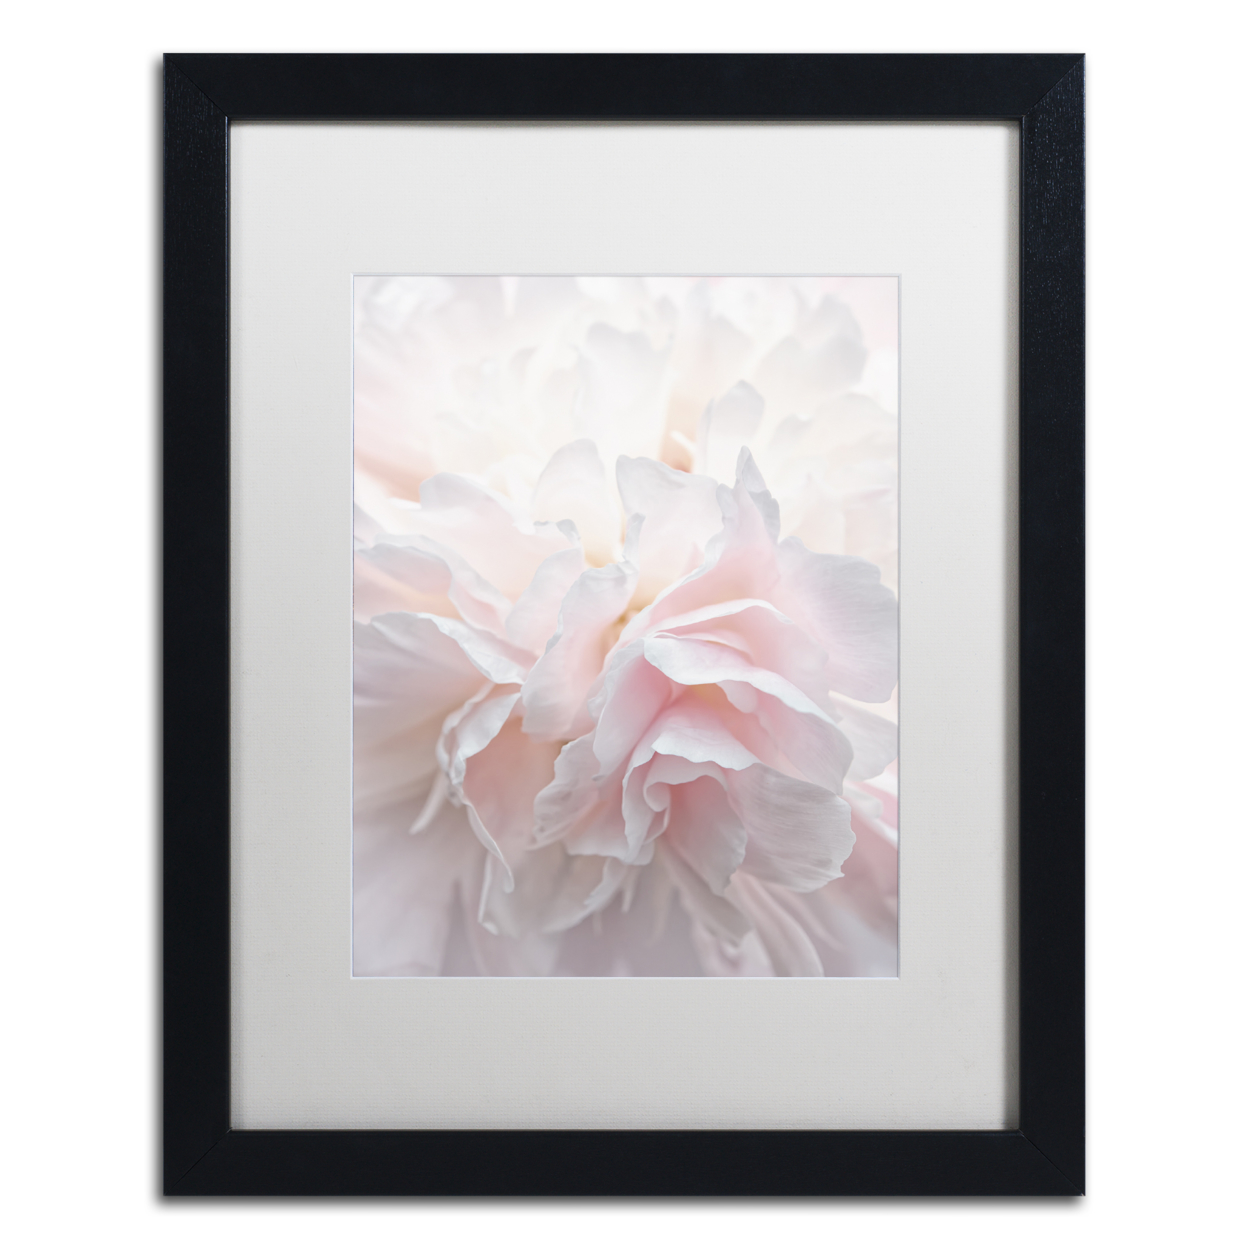 Cora Niele 'Pink Peony Petals IV' Black Wooden Framed Art 18 X 22 Inches